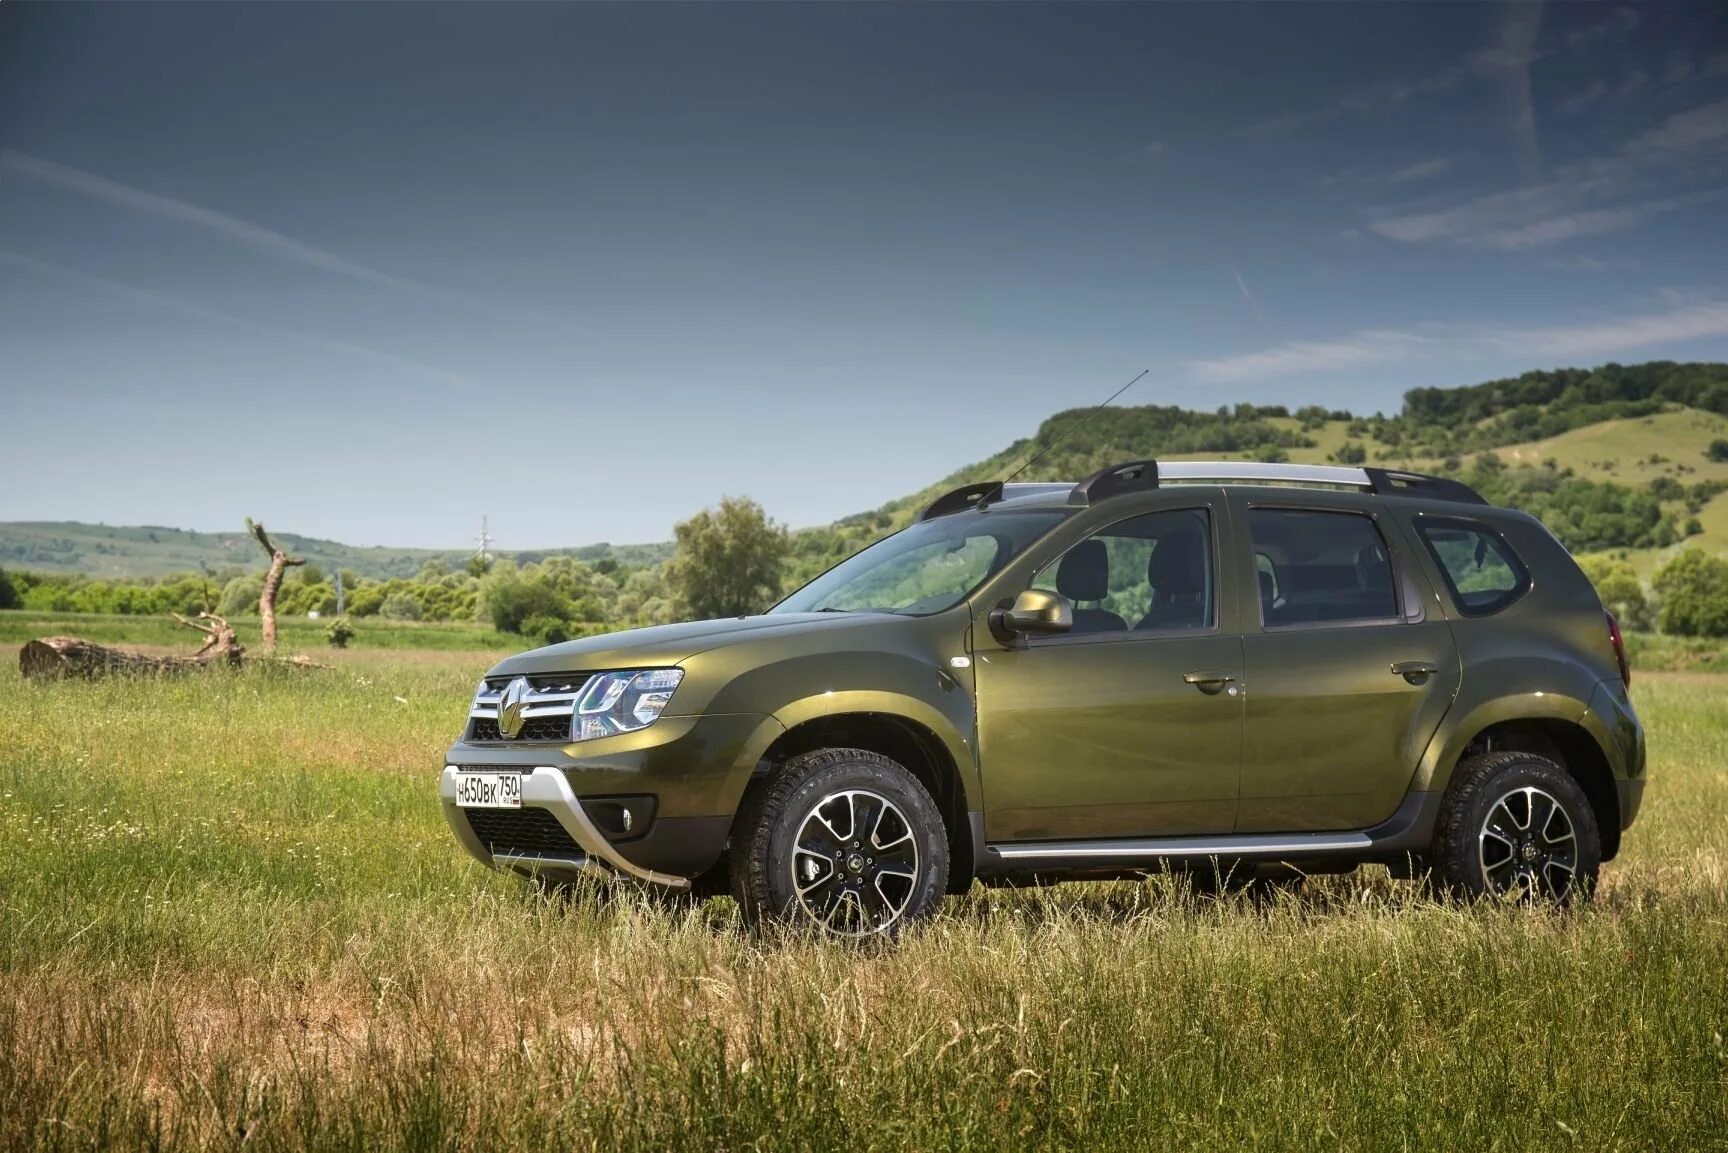 Renault Duster 2. Renault Duster 2015. Рено Дастер 2015. Рено Дастер 2 2015. Дастер 2014 2.0 4х4